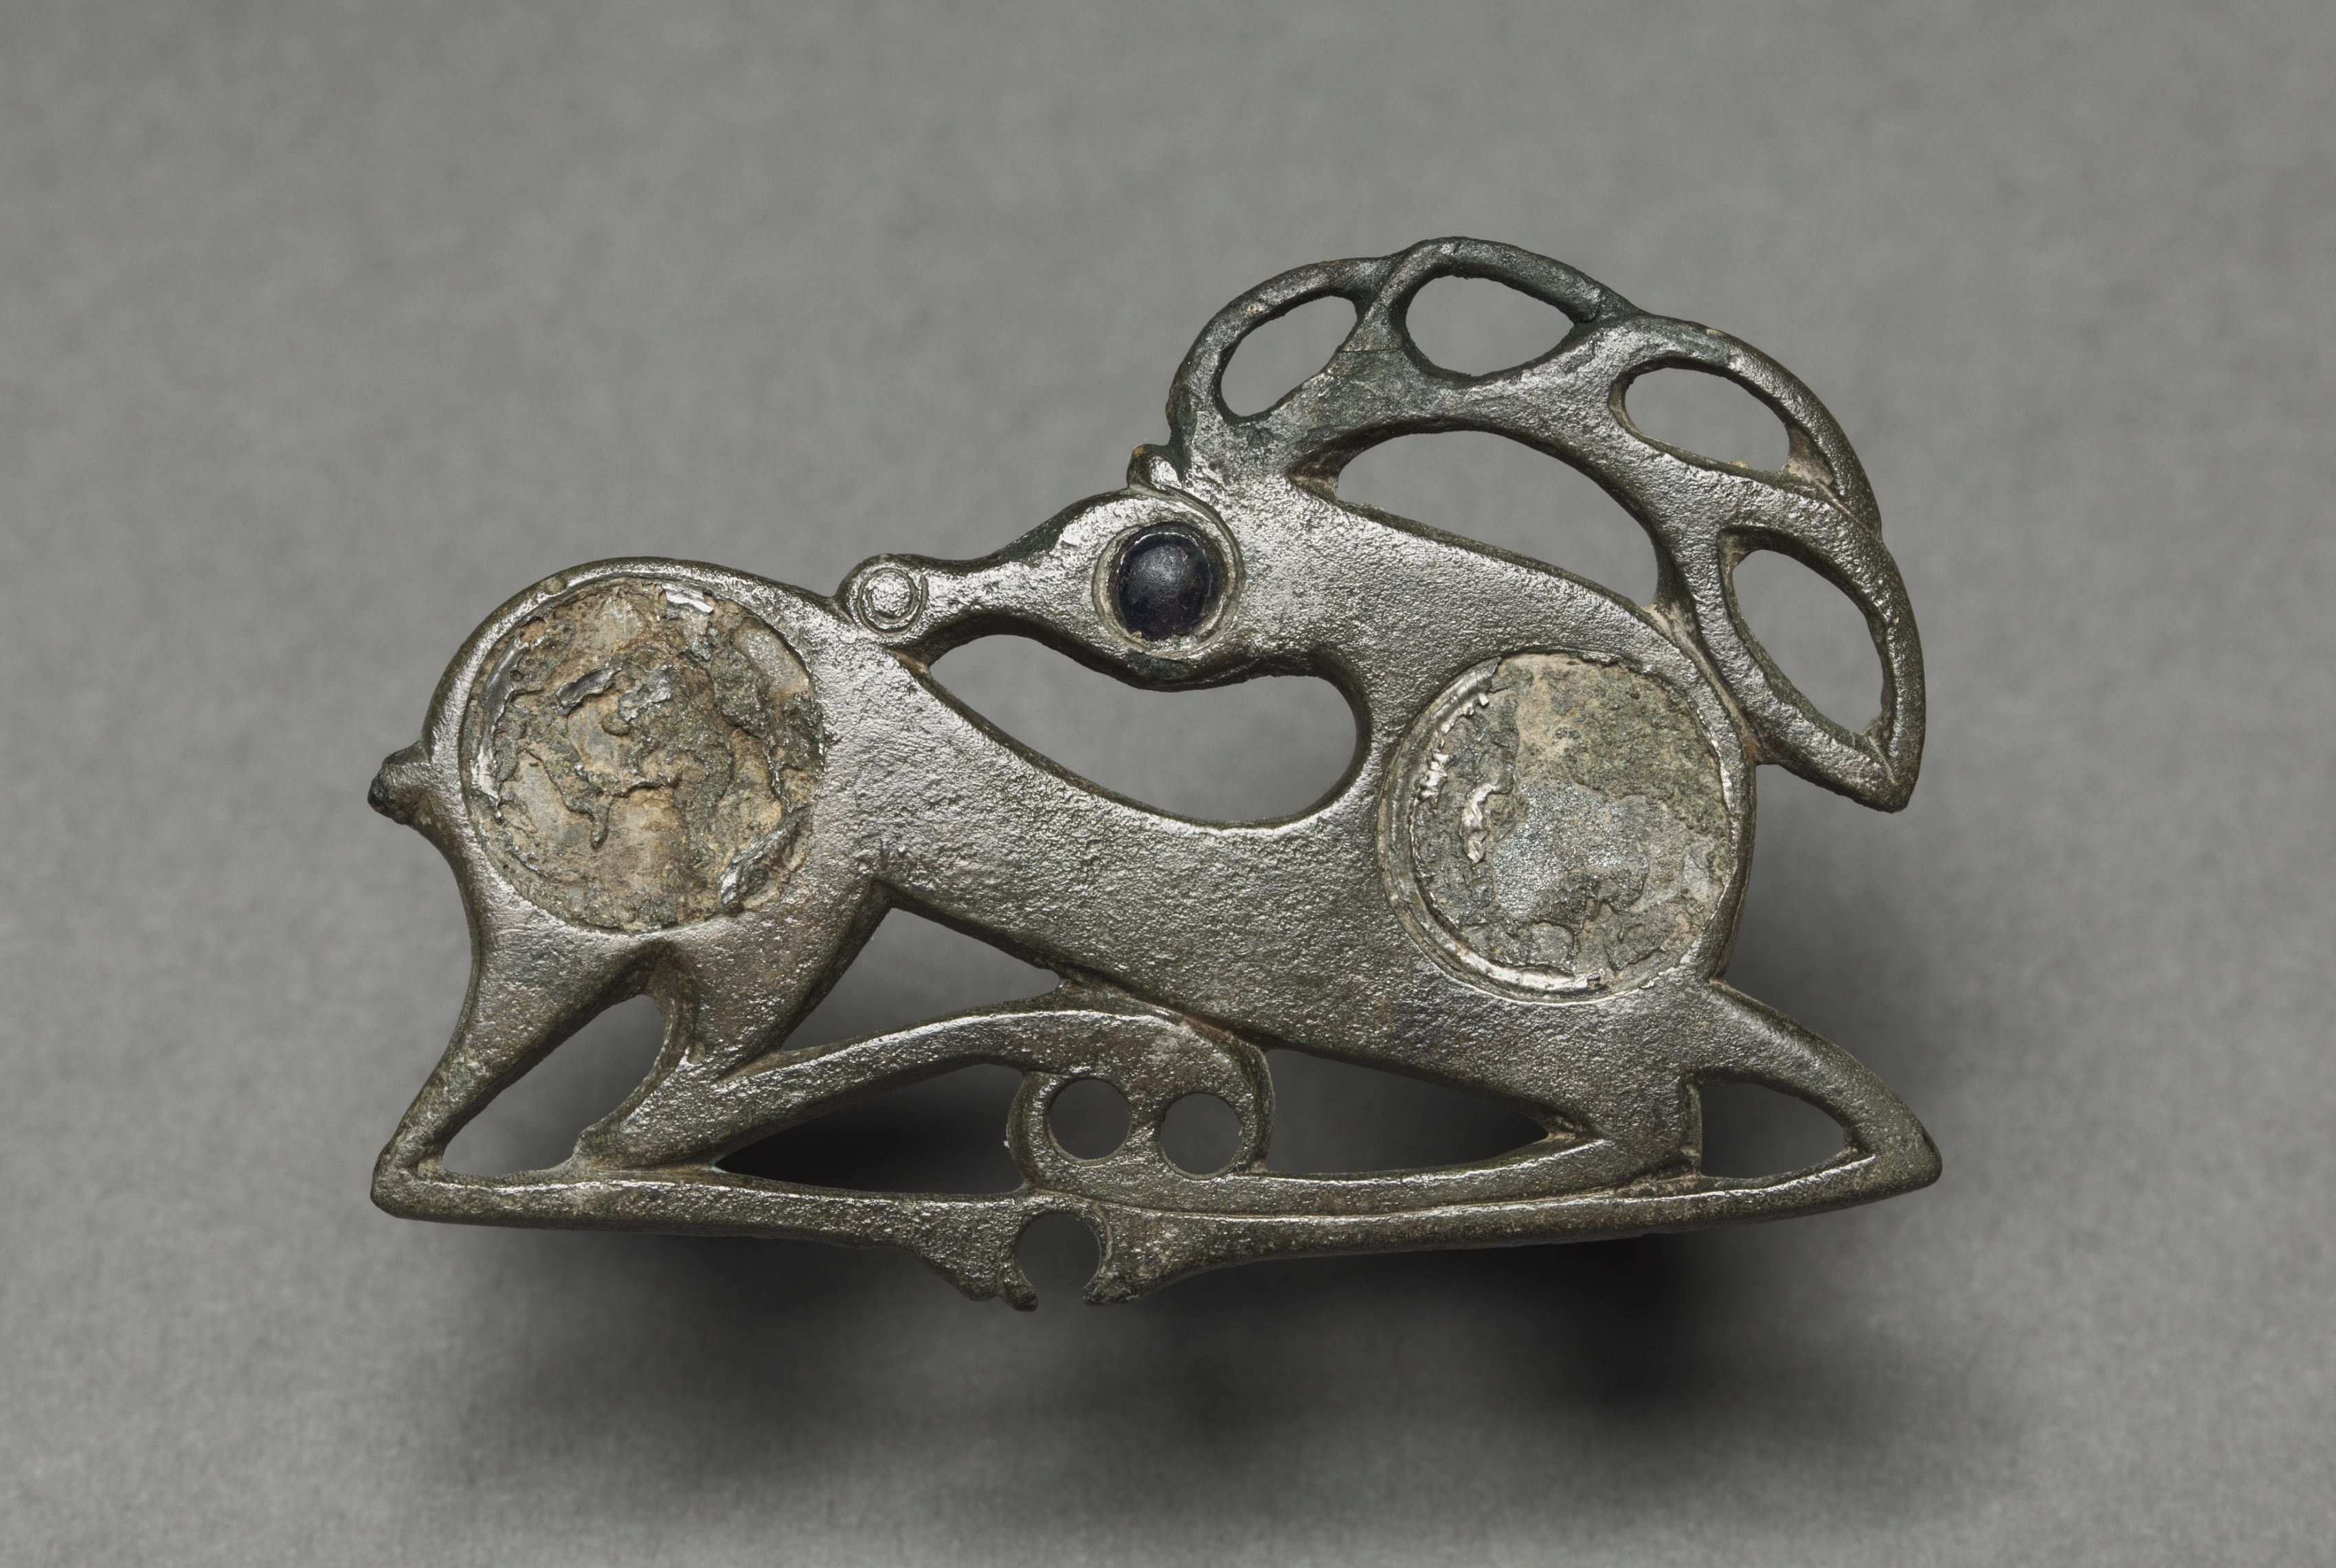 Fibula in the Form of a Recumbent Stag